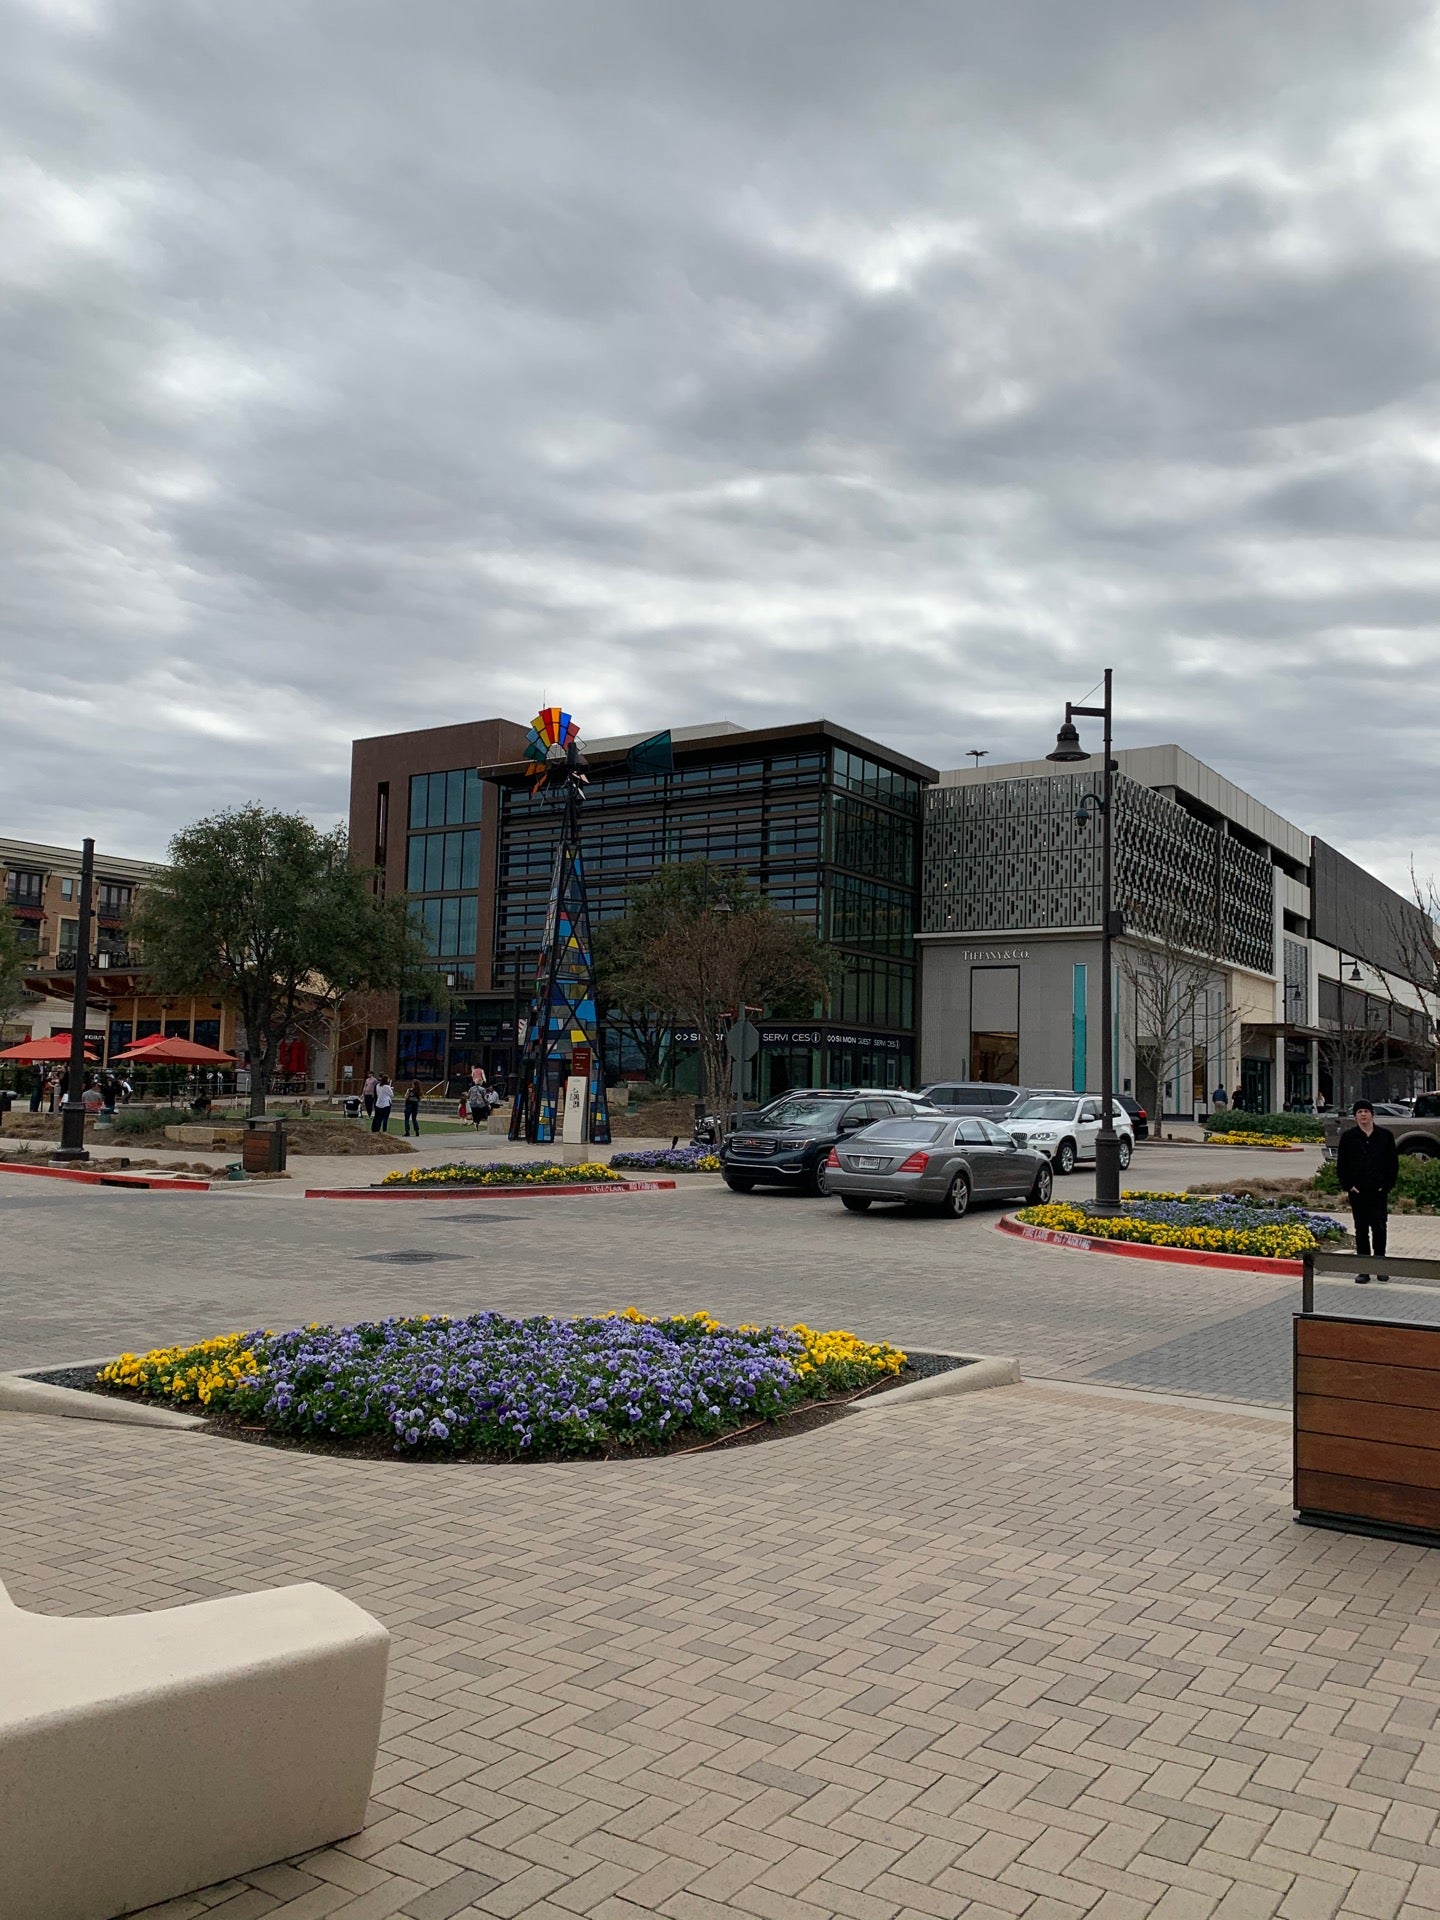 About The Shops At Clearfork - A Shopping Center in Fort Worth, TX